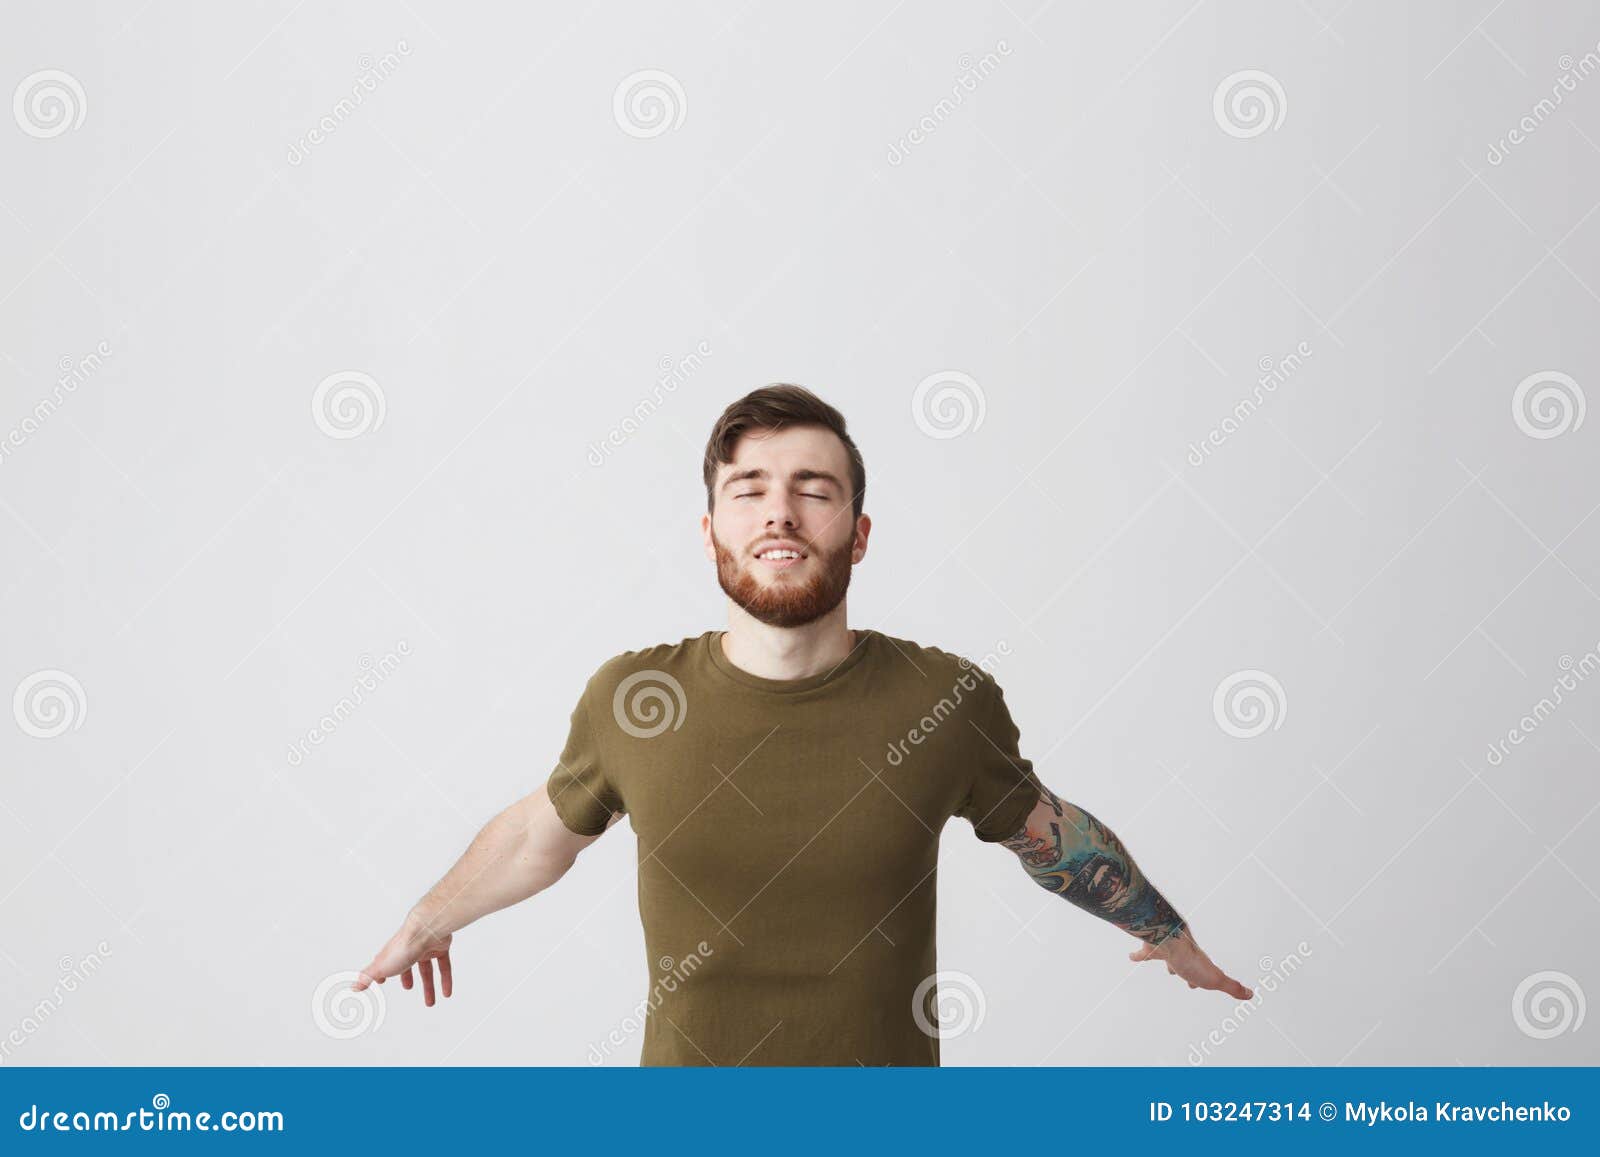 Copy Space Body Language Mature Attractive Bearded European